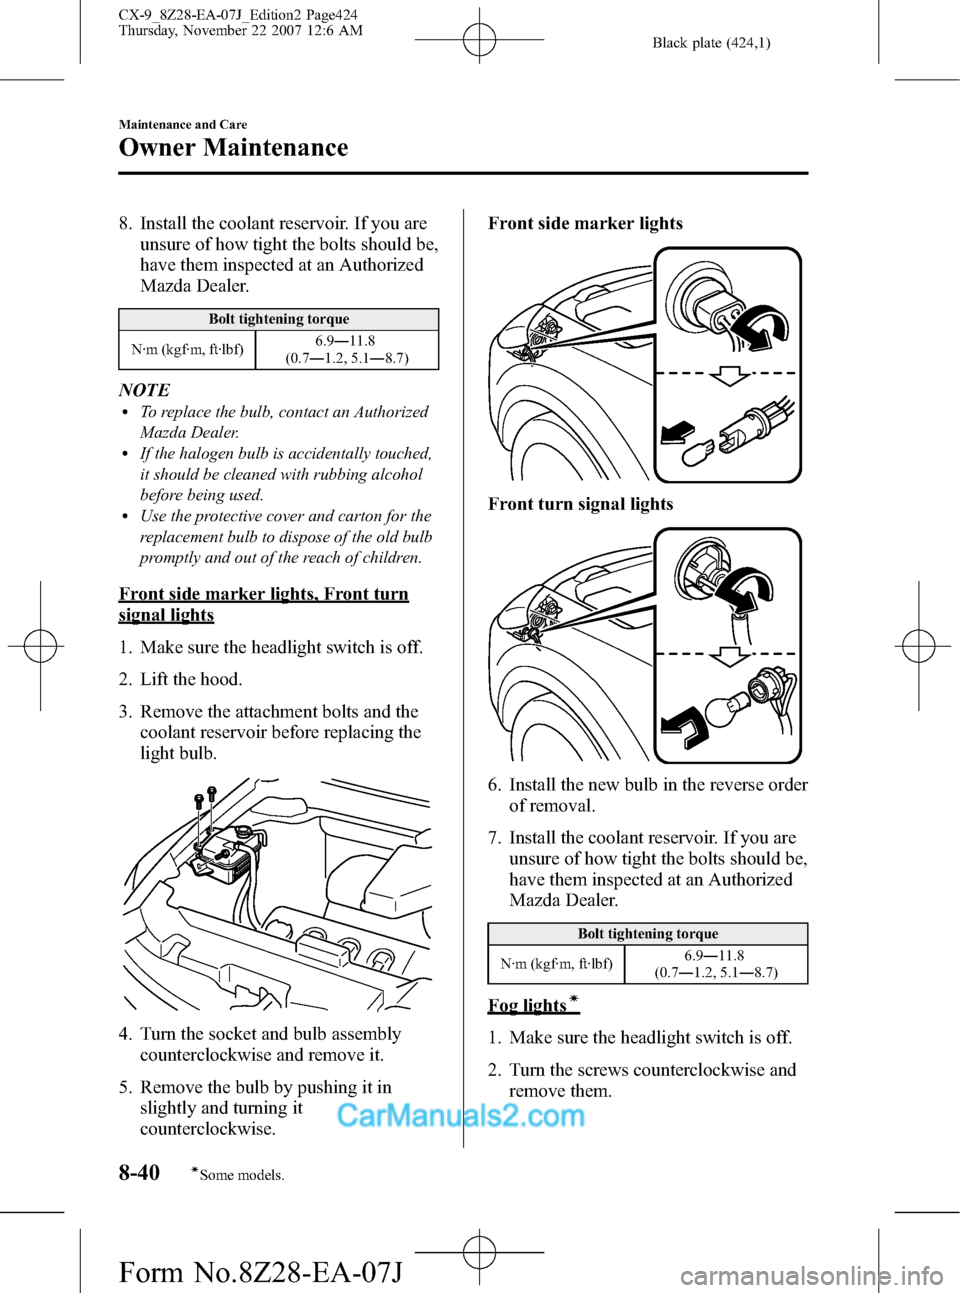 MAZDA MODEL CX-9 2008  Owners Manual (in English) Black plate (424,1)
8. Install the coolant reservoir. If you are
unsure of how tight the bolts should be,
have them inspected at an Authorized
Mazda Dealer.
Bolt tightening torque
N·m (kgf·m, ft·lb